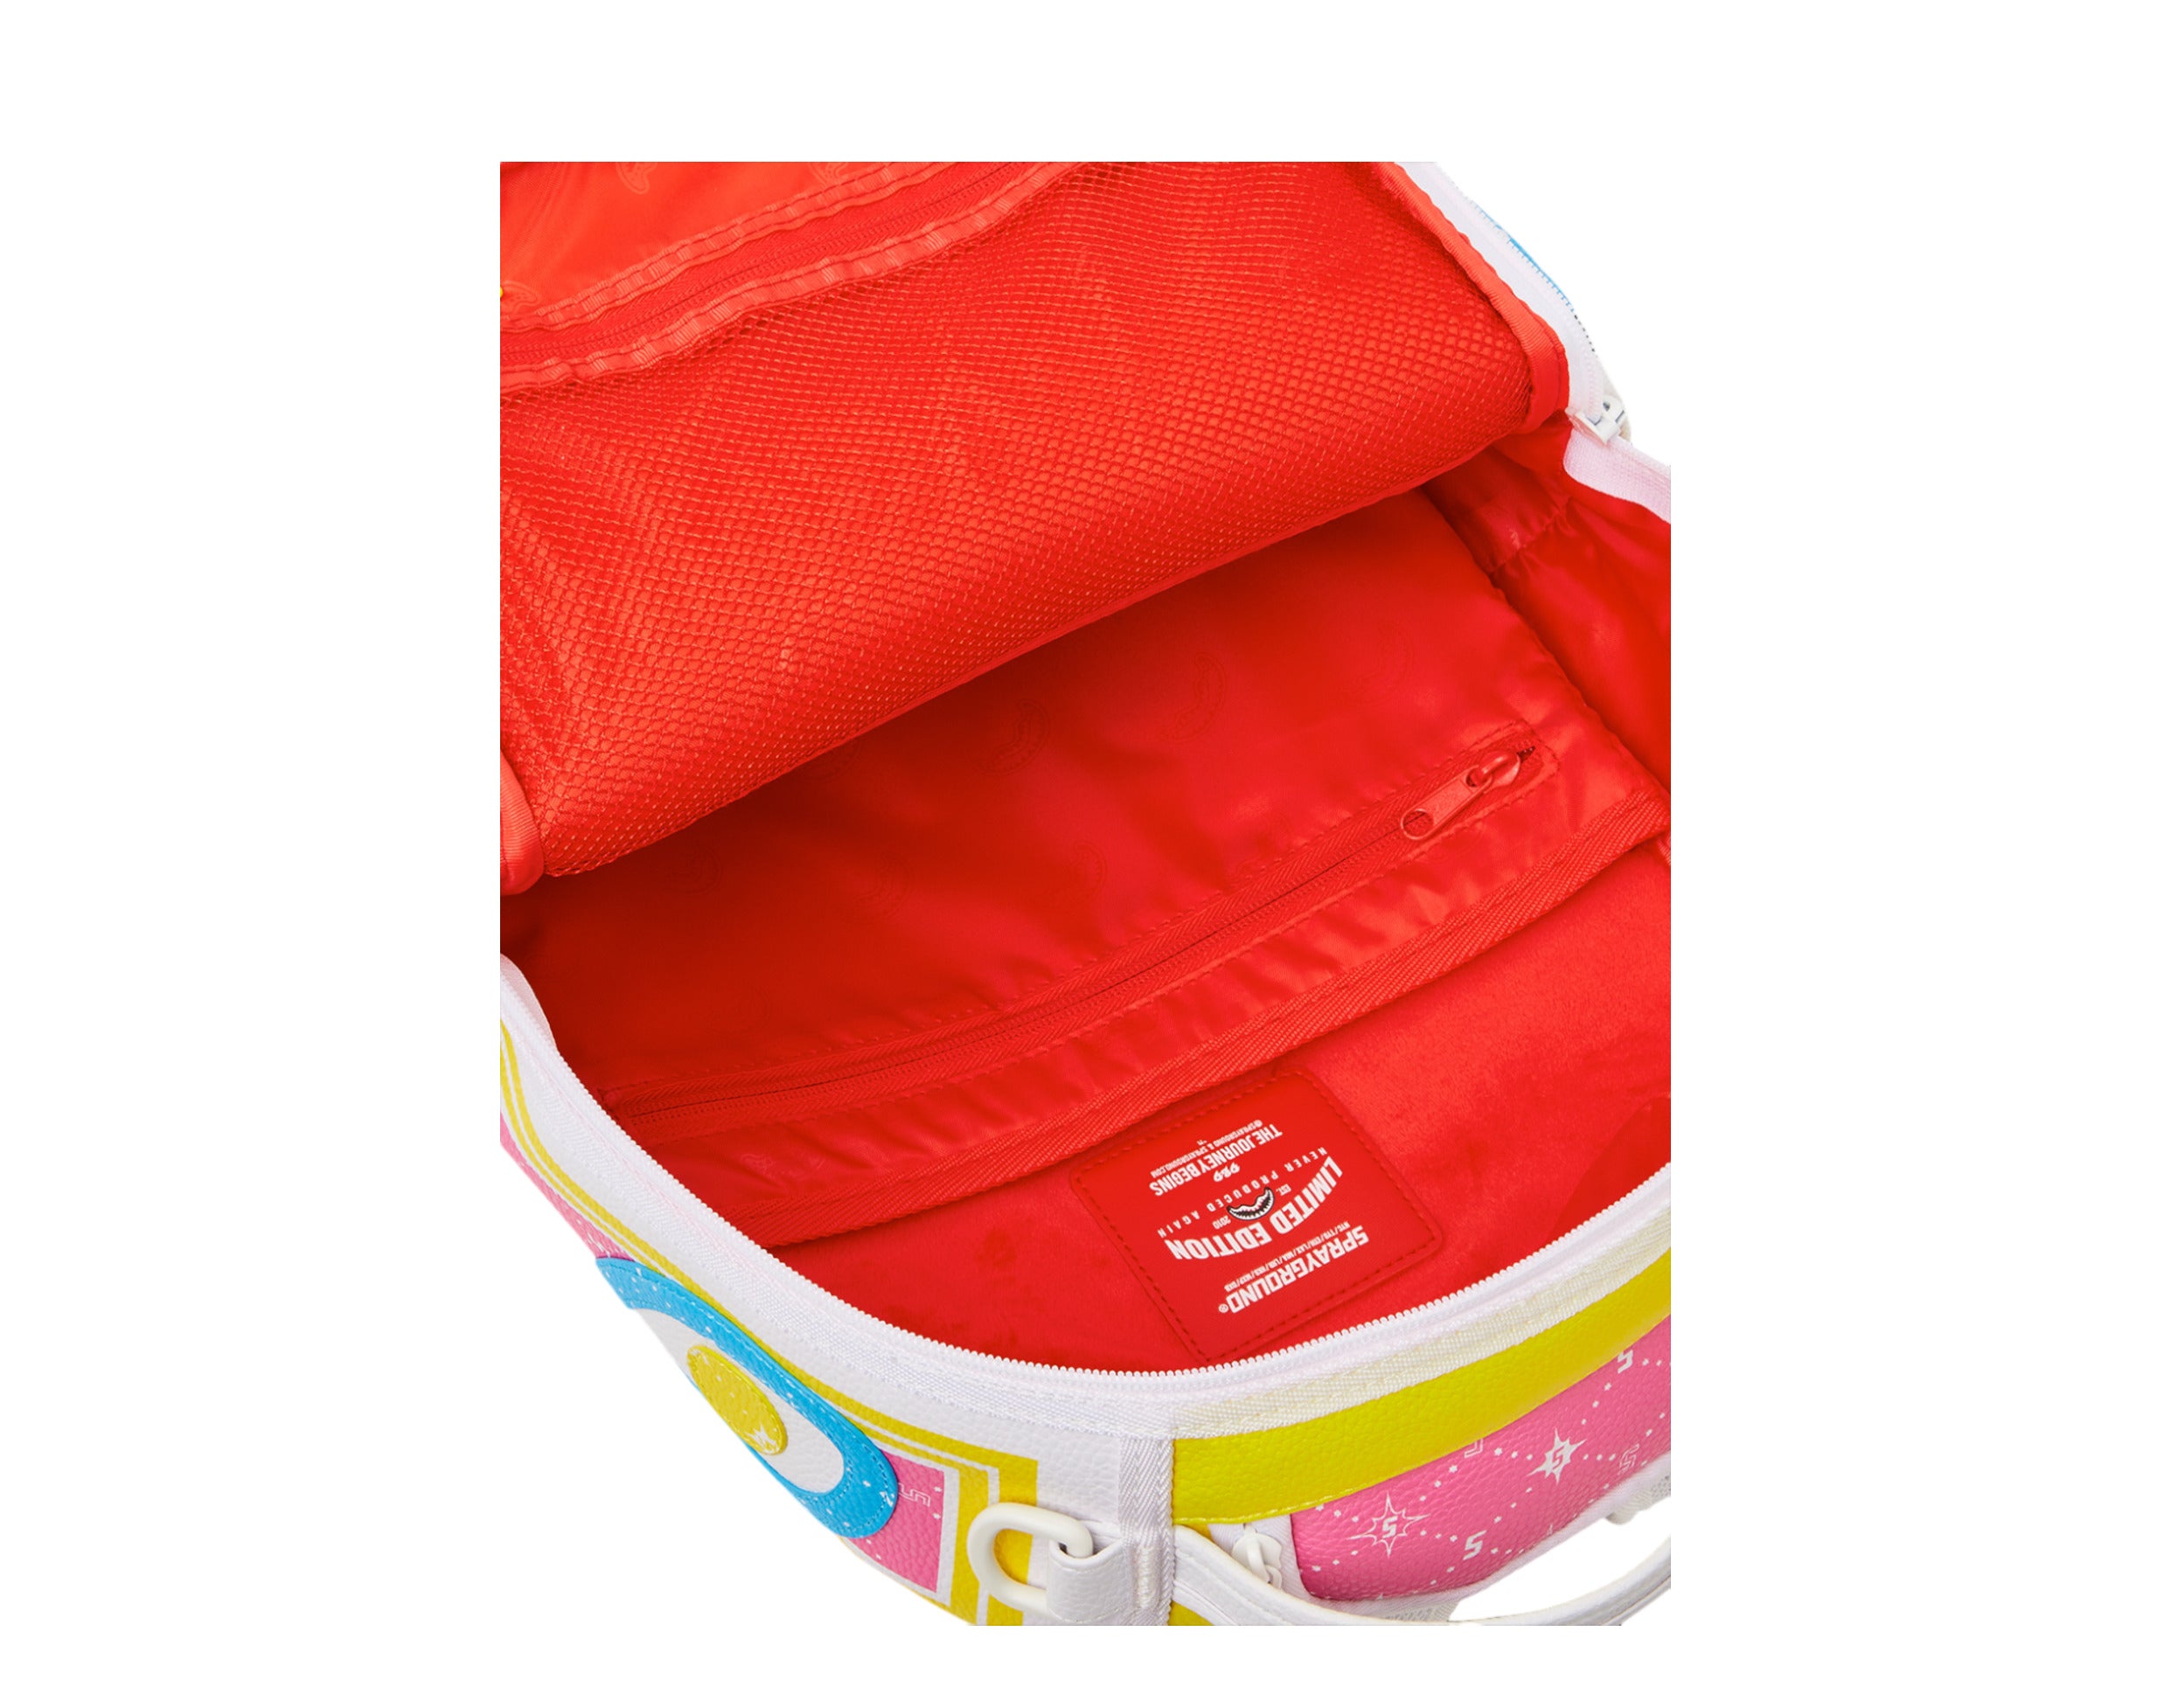 Bags, Sprayground Backpack Limited Edition Red Shark